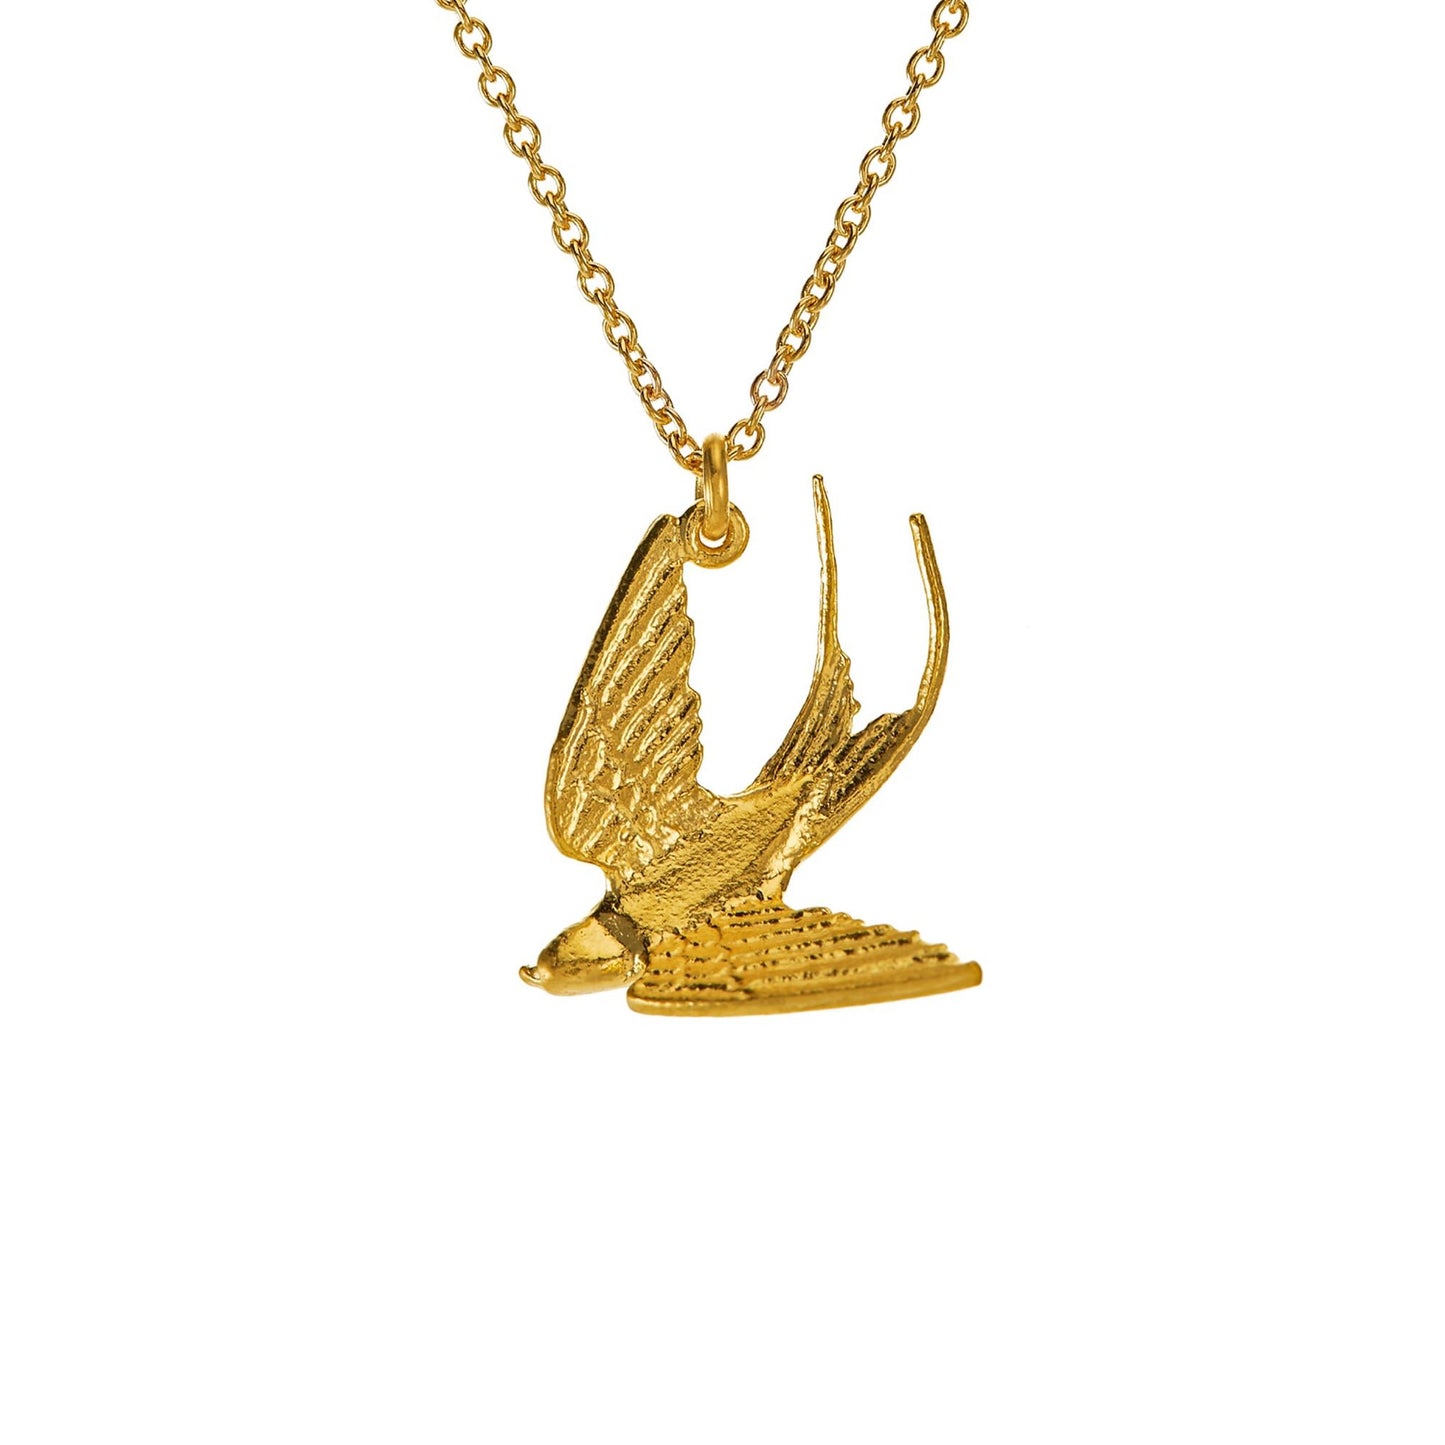 Swooping swallow necklace